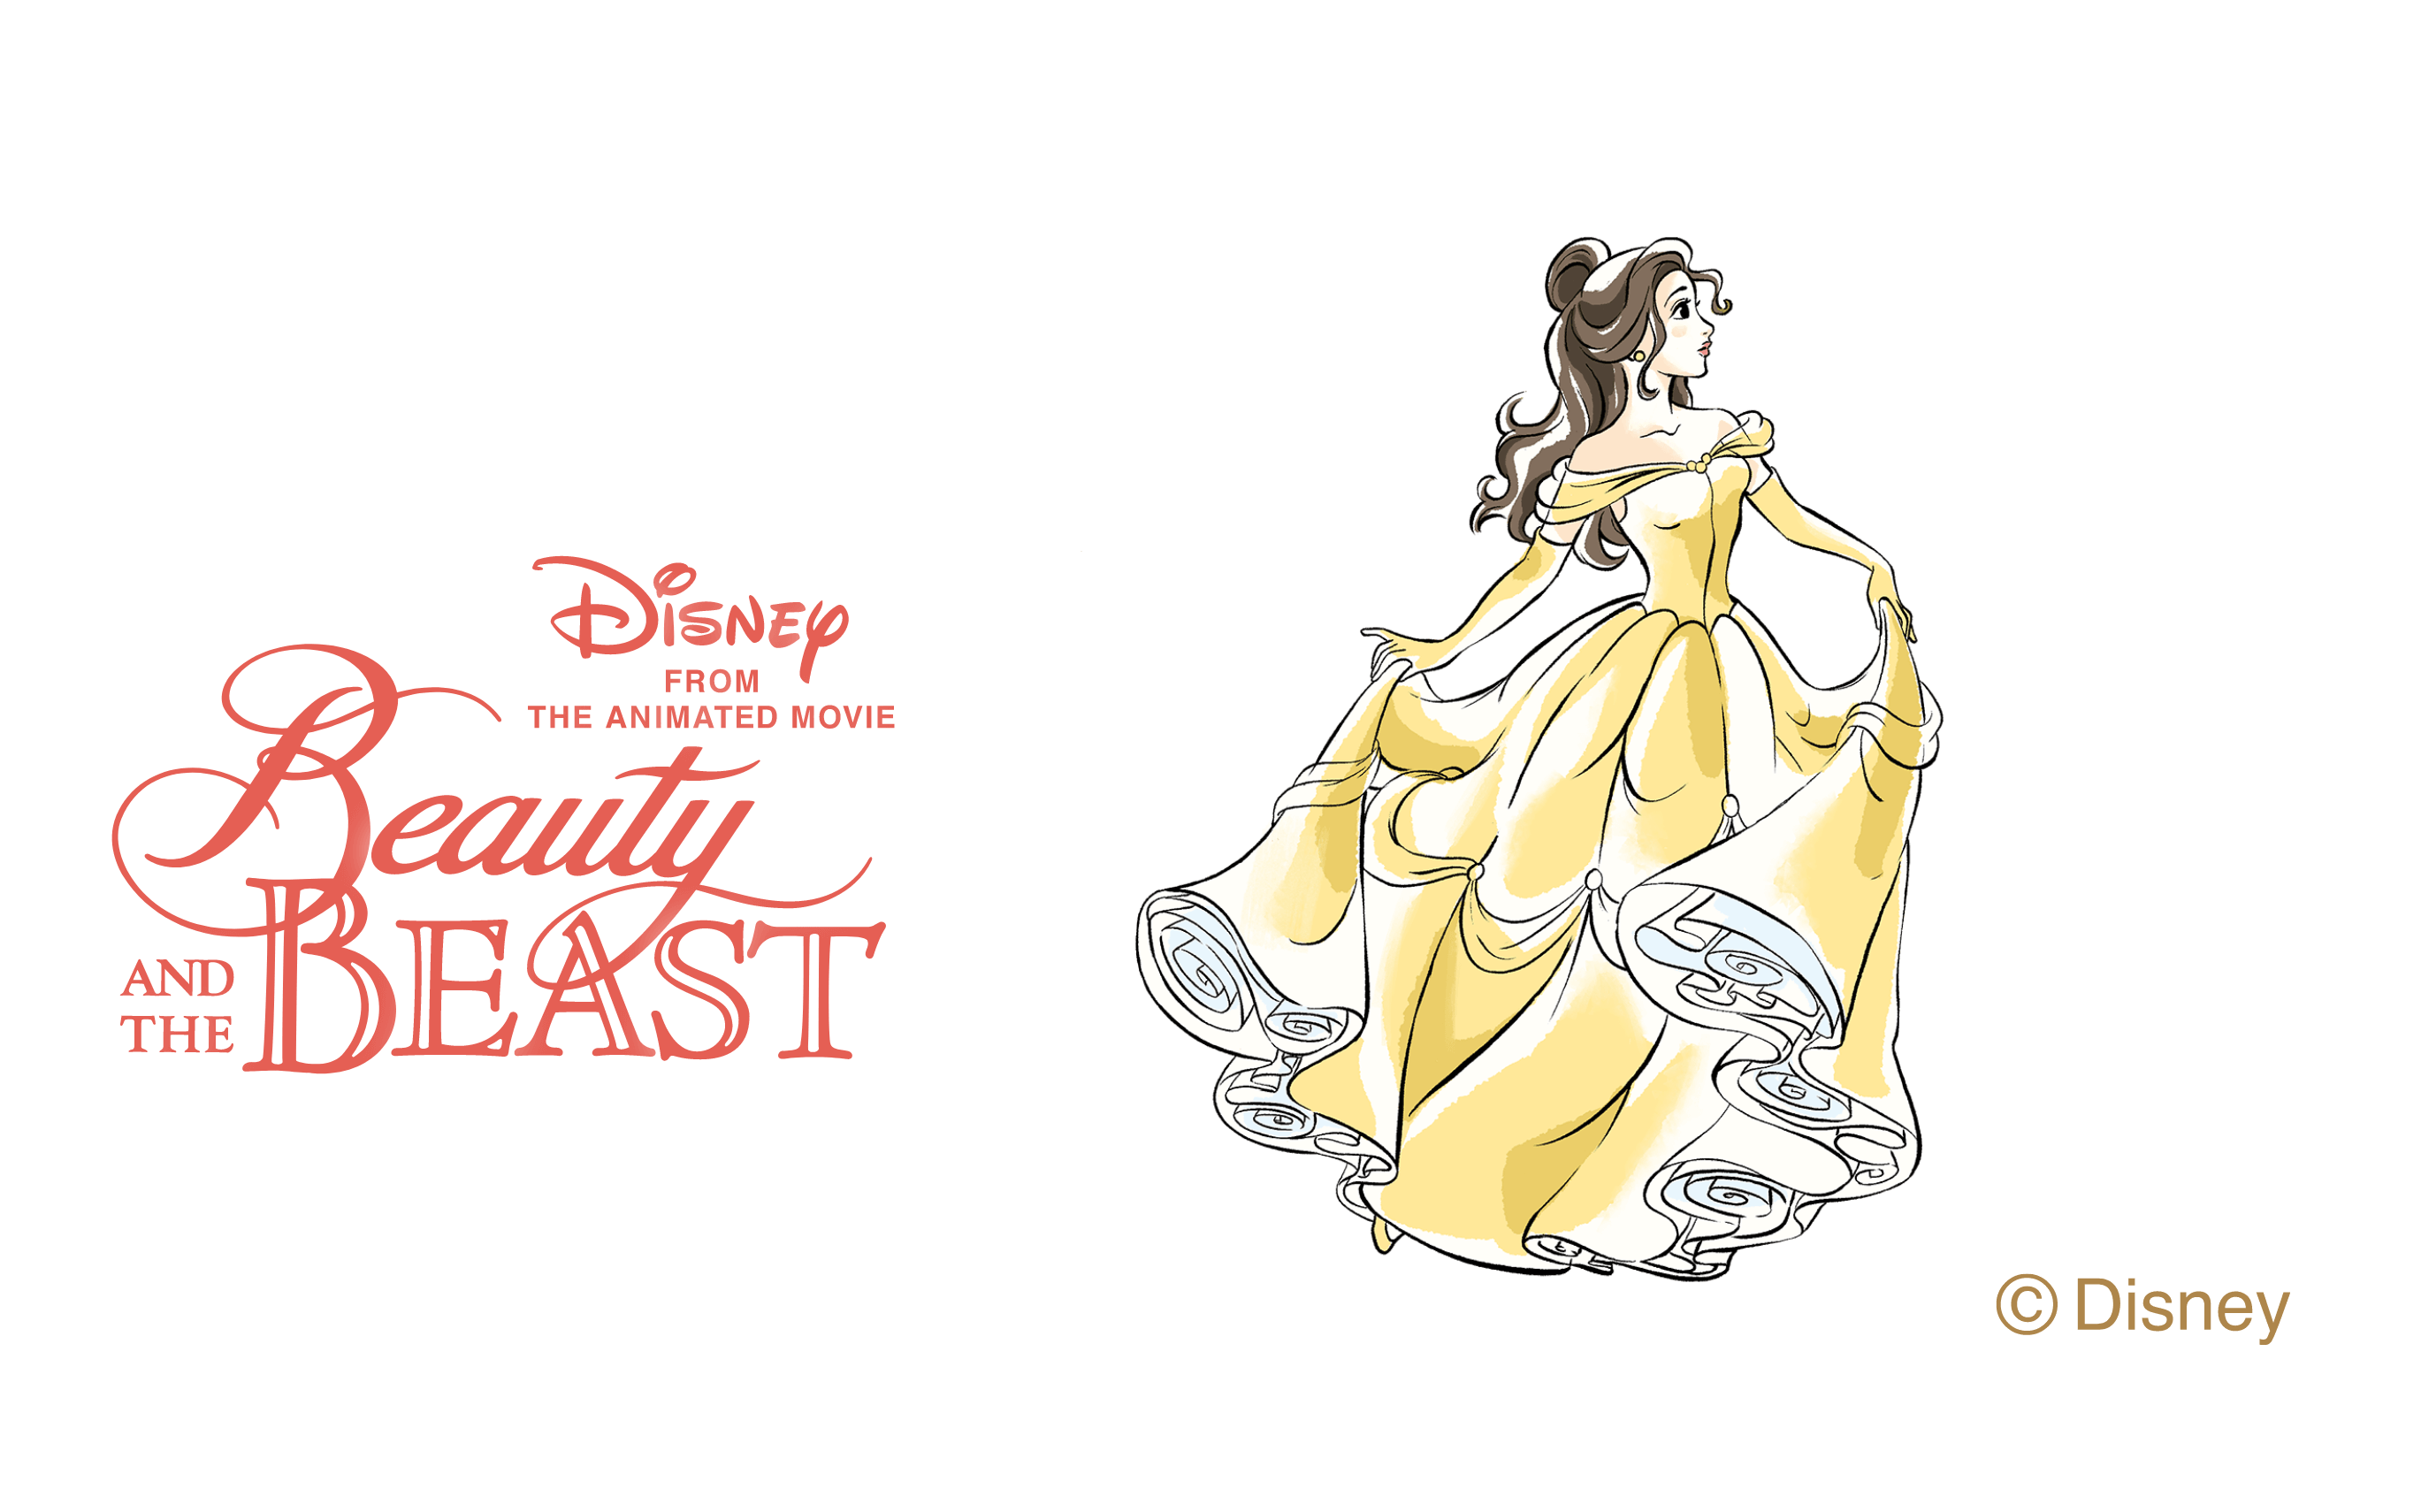 Disney from the animated movie Beauty and the BEAST